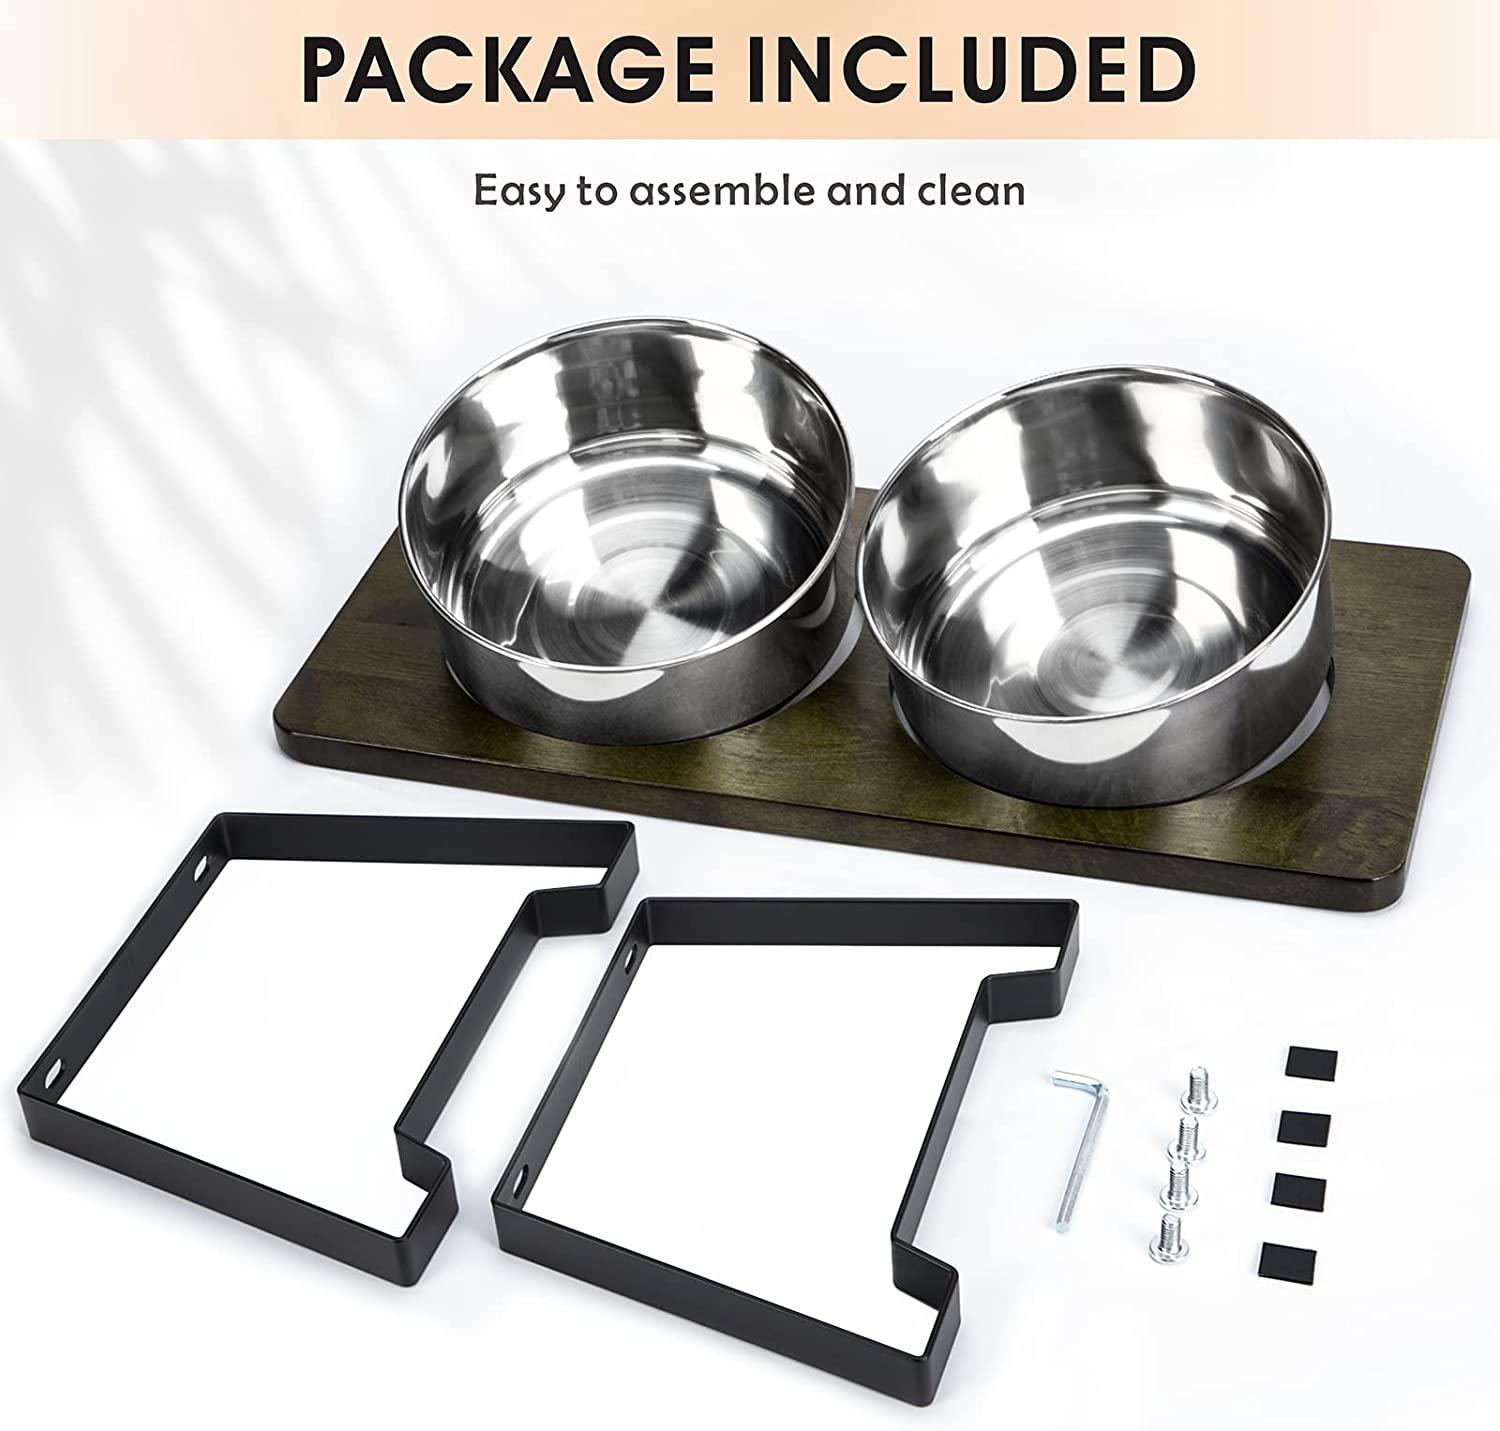 Siooko Elevated Dog Bowls for Large Dogs, Wood Raised Dog Bowl Stand with 2  Stainless Steel Dog Bowls, Dog Food Bowl and Dog Water Bowl Non-Slip Feet